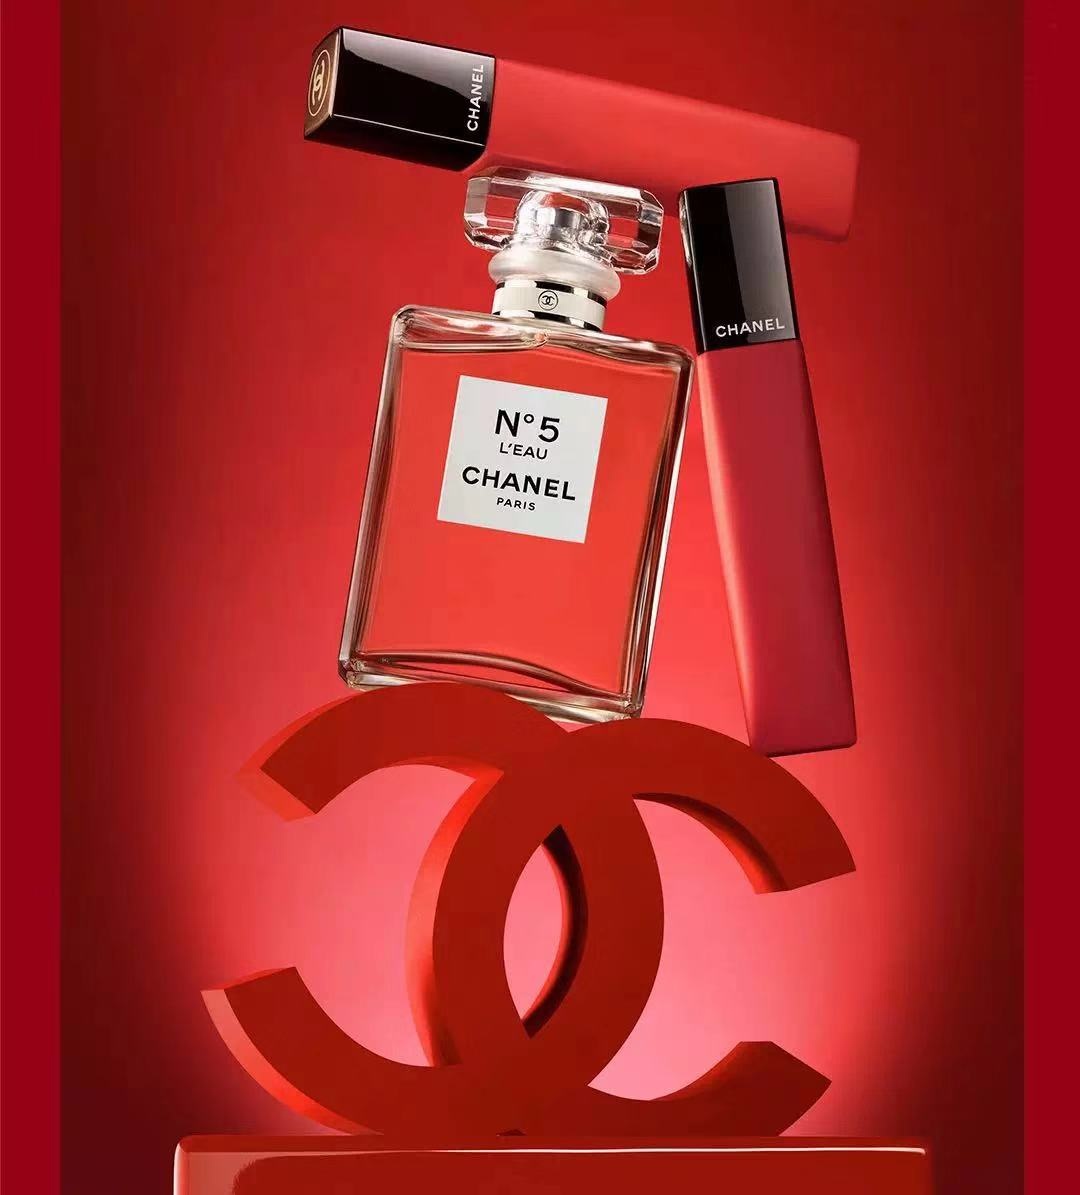 Chanel released a Singles' Day marketing campaign on WeChat. Courtesy photo